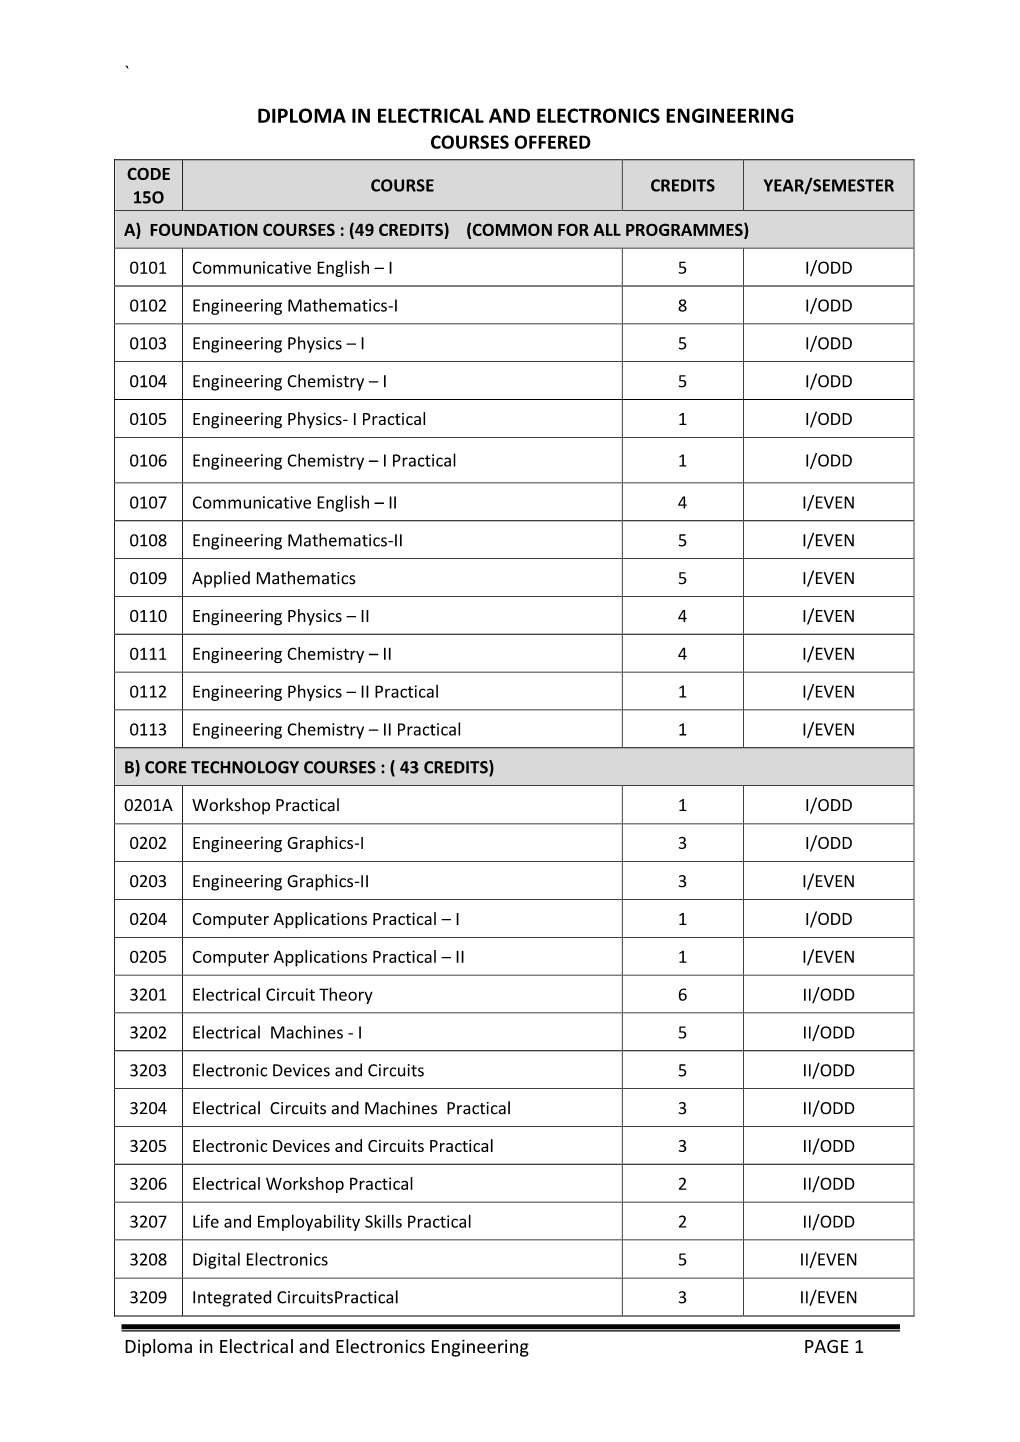 Diploma in Electrical and Electronics Engineering PAGE 1